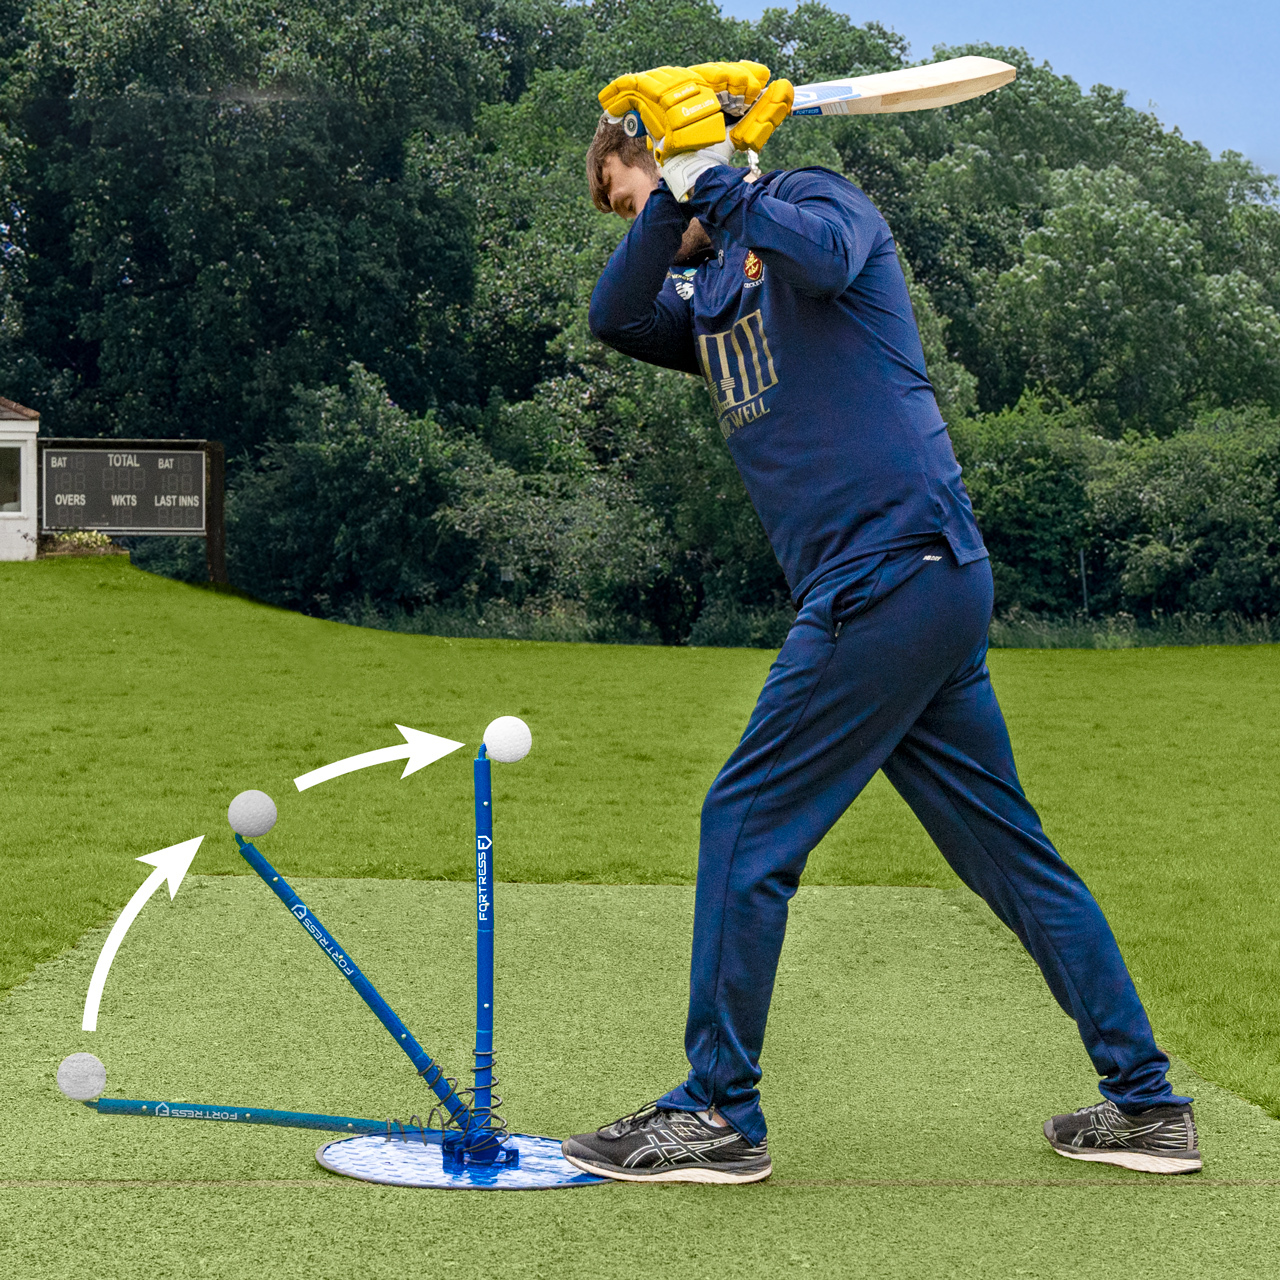 FORTRESS Spring Back Cricket Batting Aid [Packages:: No Upgrade]